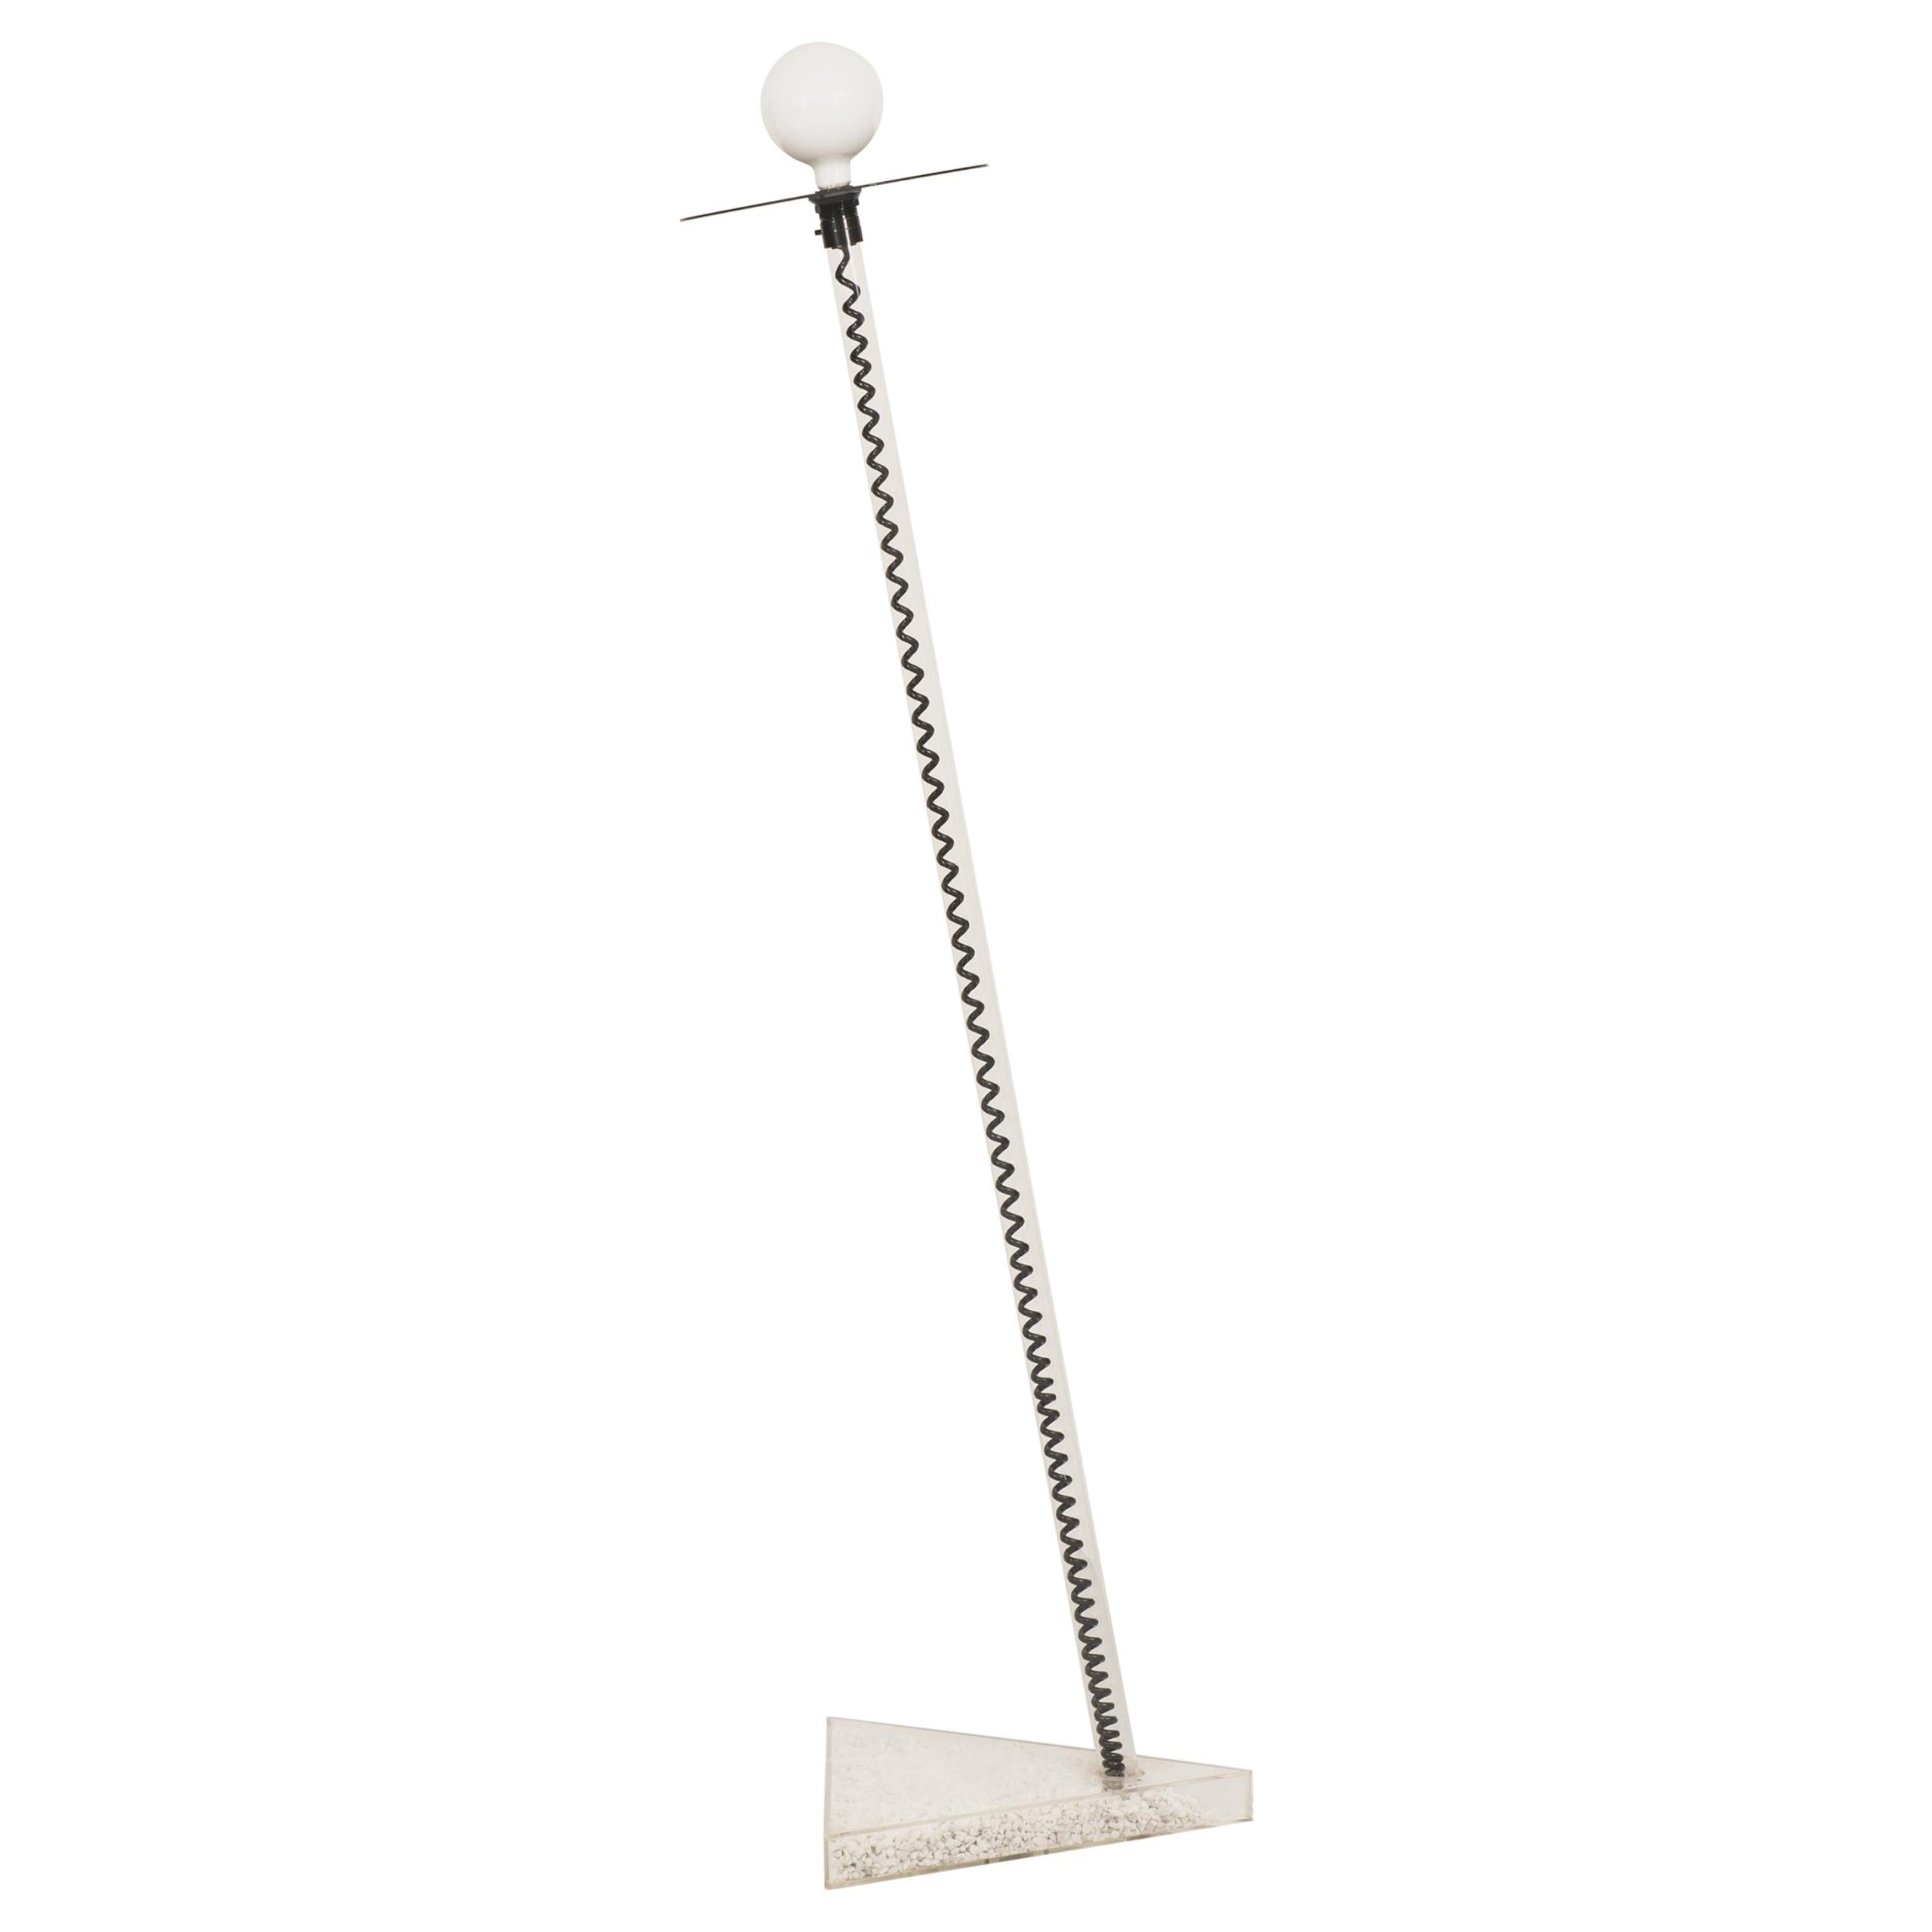 Floor Lamp in the Manner of the Memphis Group Probably Produced in Italy